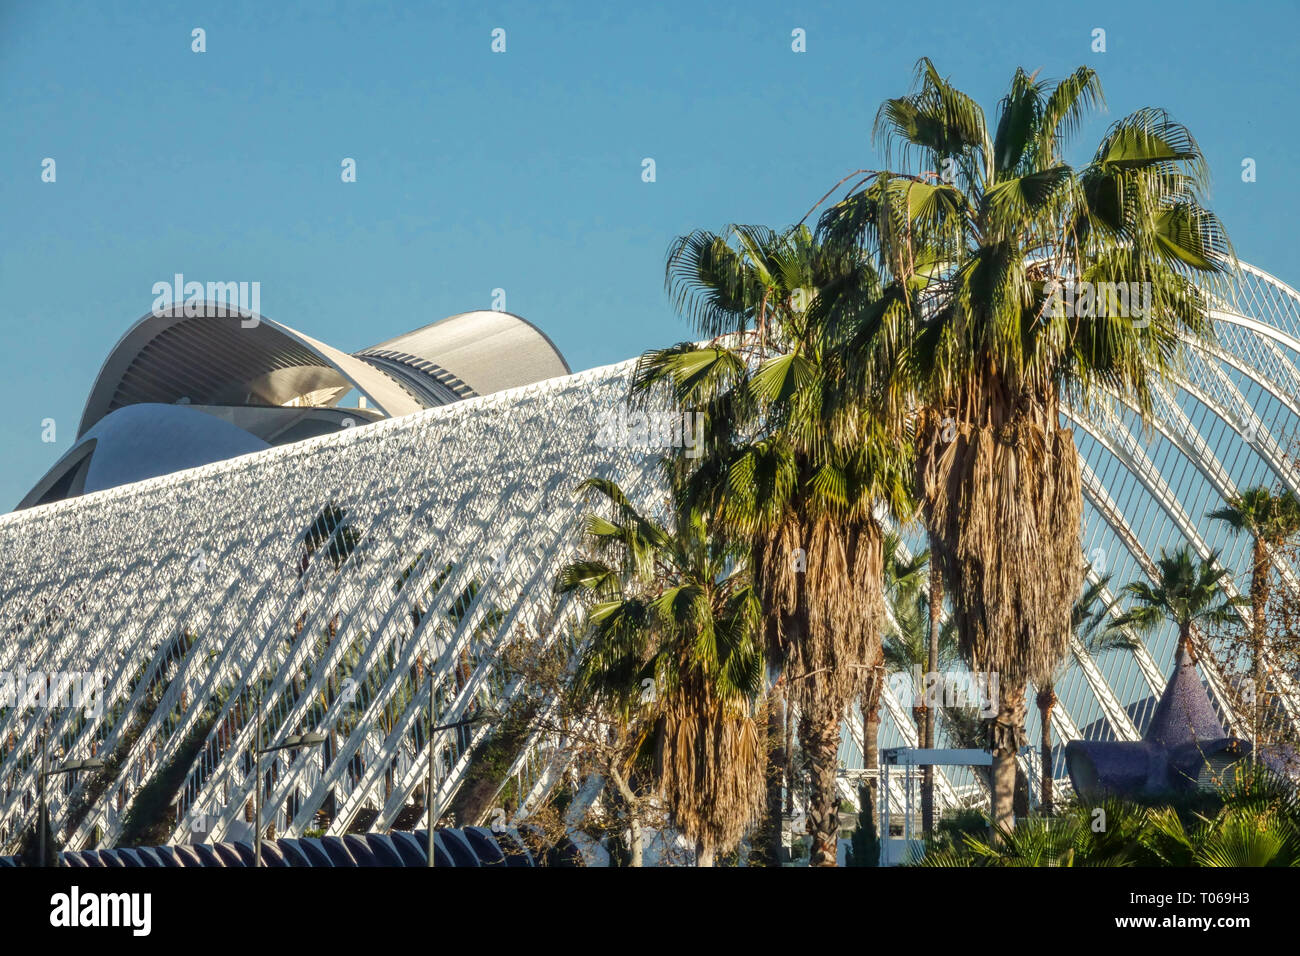 The Umbracle, Valencia Palm tree Valencia City of Arts and Sciences, Spain architecture Stock Photo